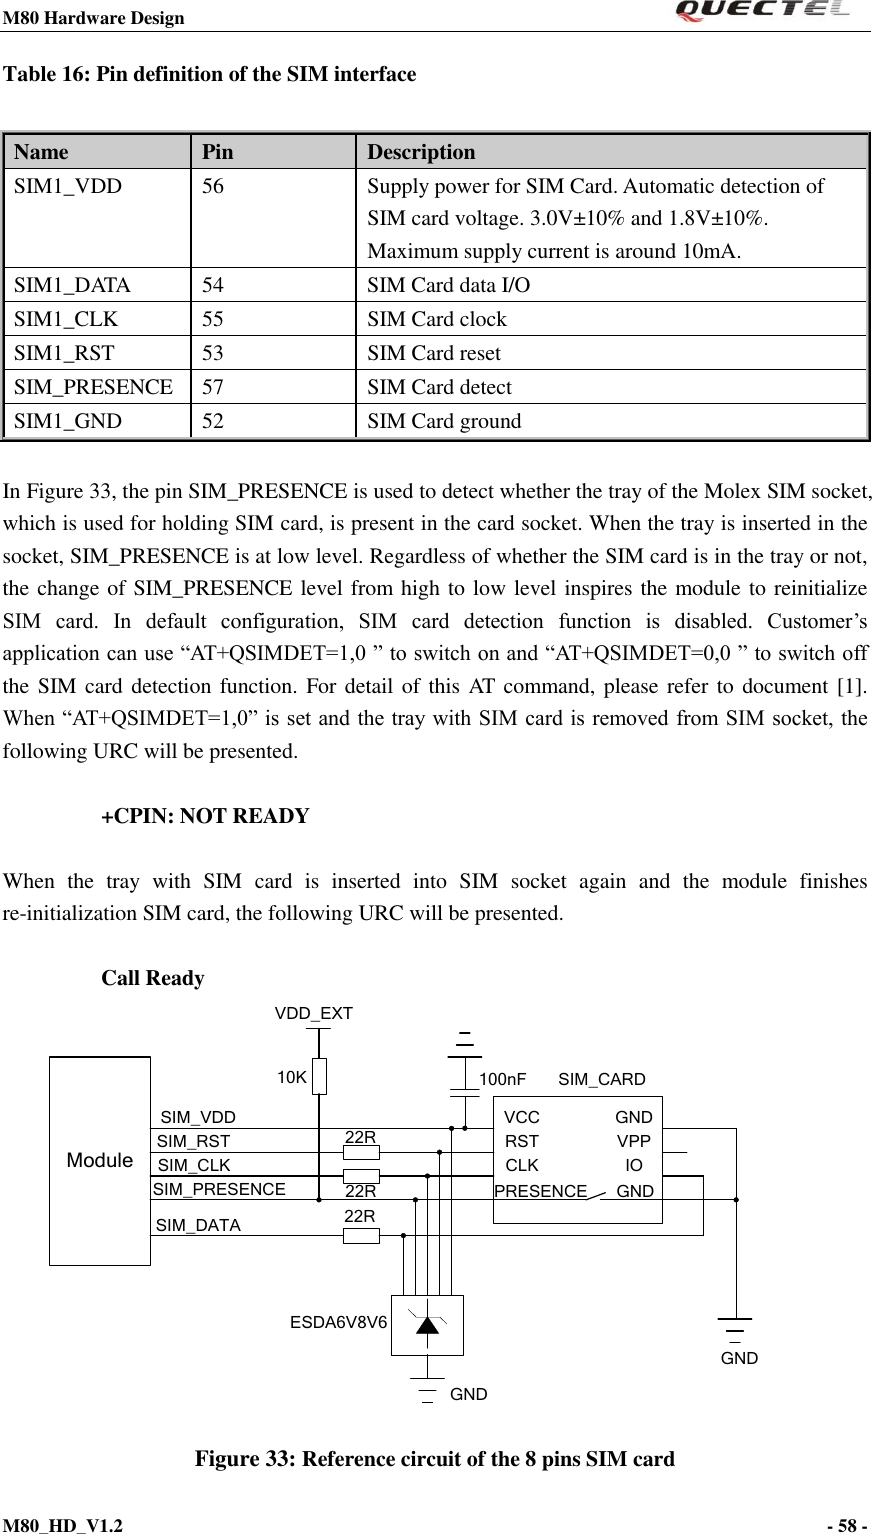 M80 Hardware Design                                                                M80_HD_V1.2                                                                                                                                        - 58 -    Table 16: Pin definition of the SIM interface  In Figure 33, the pin SIM_PRESENCE is used to detect whether the tray of the Molex SIM socket, which is used for holding SIM card, is present in the card socket. When the tray is inserted in the socket, SIM_PRESENCE is at low level. Regardless of whether the SIM card is in the tray or not, the change of SIM_PRESENCE level from high to low level inspires the module to reinitialize SIM  card.  In  default  configuration,  SIM  card  detection  function  is  disabled.  Customer’s application can use “AT+QSIMDET=1,0 ” to switch on and “AT+QSIMDET=0,0 ” to switch off the SIM card detection  function. For detail of this AT command, please refer to document [1]. When “AT+QSIMDET=1,0” is set and the tray with SIM card is removed from SIM socket, the following URC will be presented.        +CPIN: NOT READY  When  the  tray  with  SIM  card  is  inserted  into  SIM  socket  again  and  the  module  finishes               re-initialization SIM card, the following URC will be presented.      Call Ready ModuleSIM_VDDSIM_RSTSIM_CLKSIM_DATASIM_PRESENCE22R22R22RVCCRSTCLK IOVPPGNDVDD_EXT10K 100nF SIM_CARDGNDGNDESDA6V8V6GNDPRESENCE Figure 33: Reference circuit of the 8 pins SIM card Name Pin Description SIM1_VDD 56 Supply power for SIM Card. Automatic detection of SIM card voltage. 3.0V±10% and 1.8V±10%. Maximum supply current is around 10mA. SIM1_DATA 54 SIM Card data I/O SIM1_CLK 55 SIM Card clock SIM1_RST 53 SIM Card reset SIM_PRESENCE 57 SIM Card detect SIM1_GND 52 SIM Card ground 